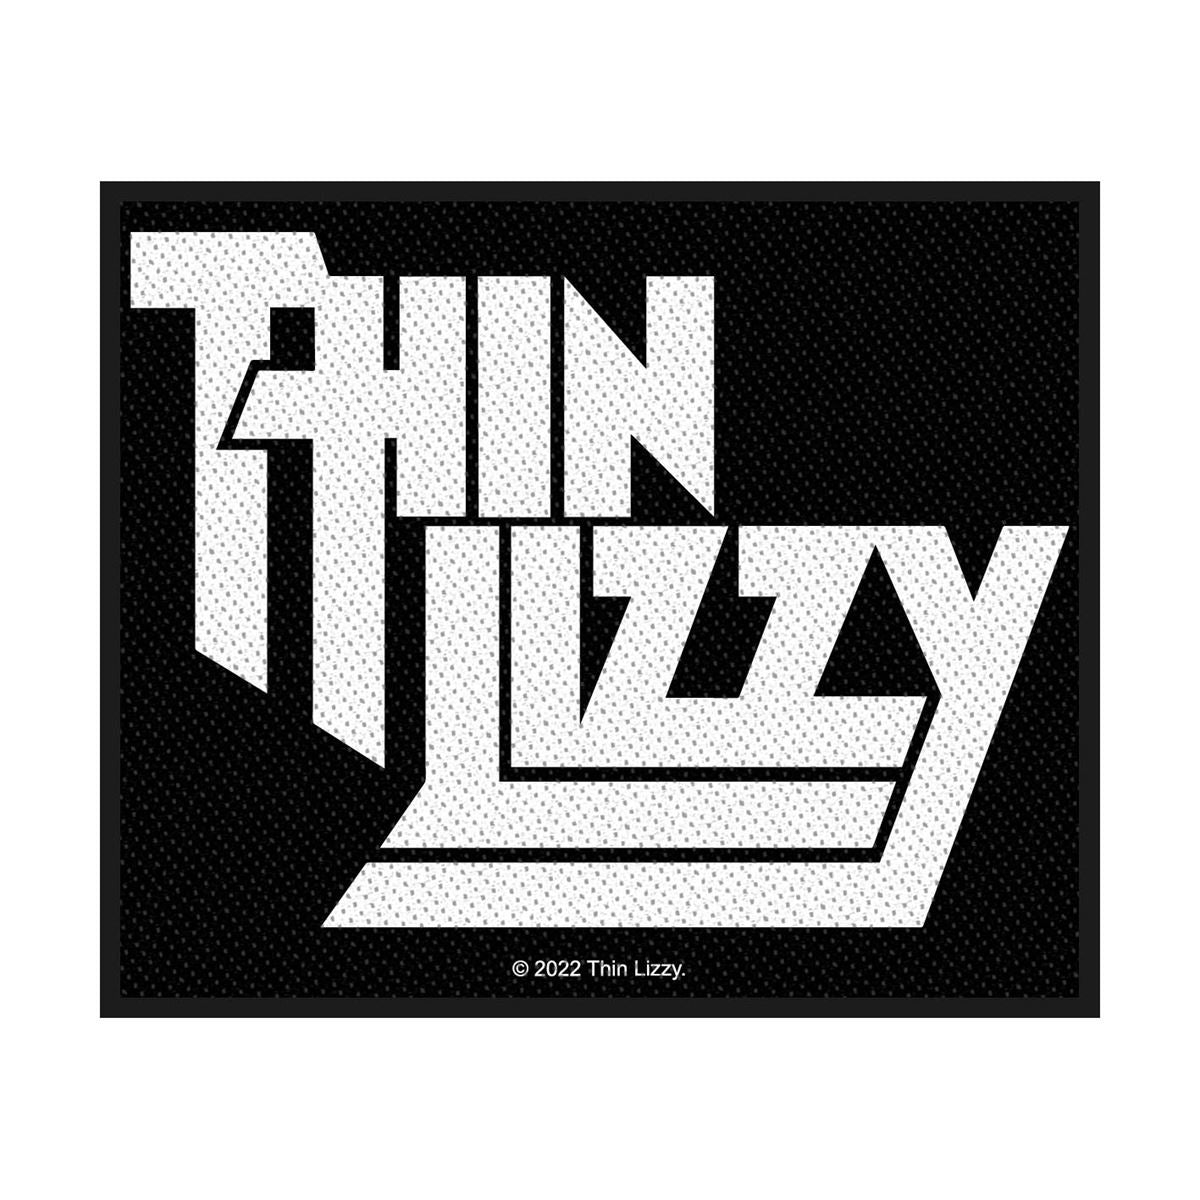 Thin Lizzy - Logo (100mm x 85mm) Sew-On Patch